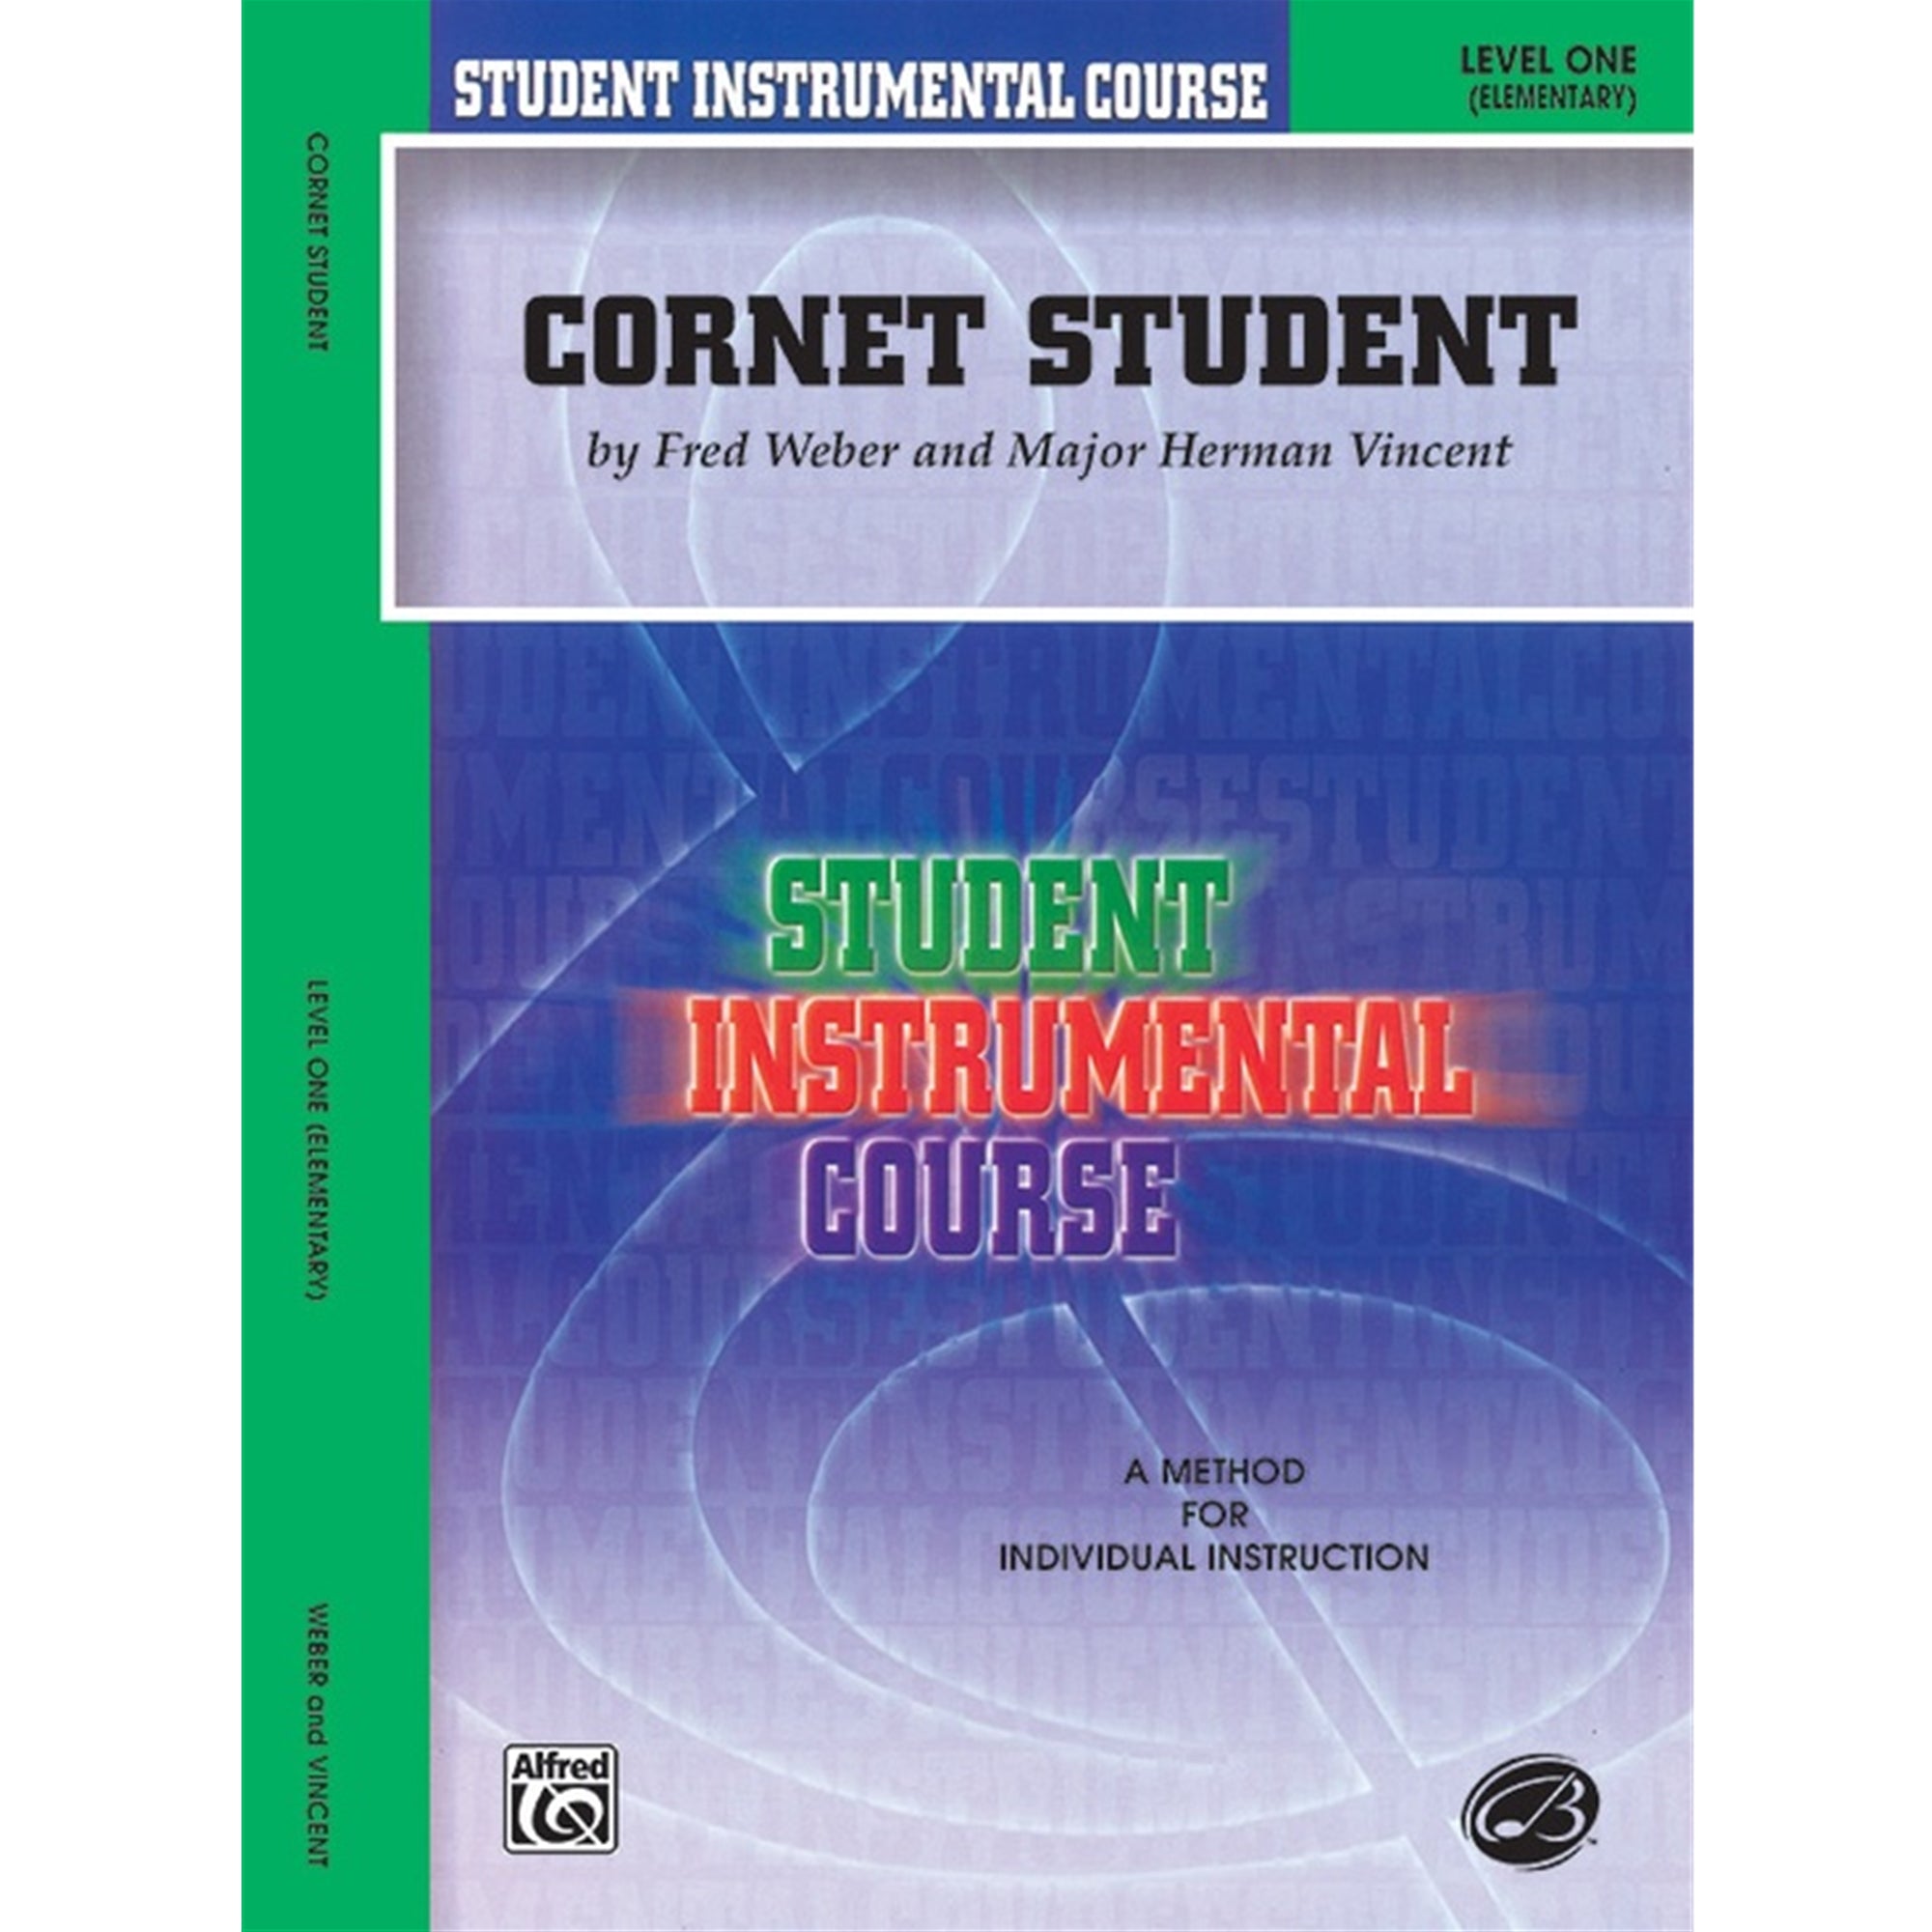 ALFRED BIC00146A Student Instrumental Course: Cornet Student, Level I [Trumpet]